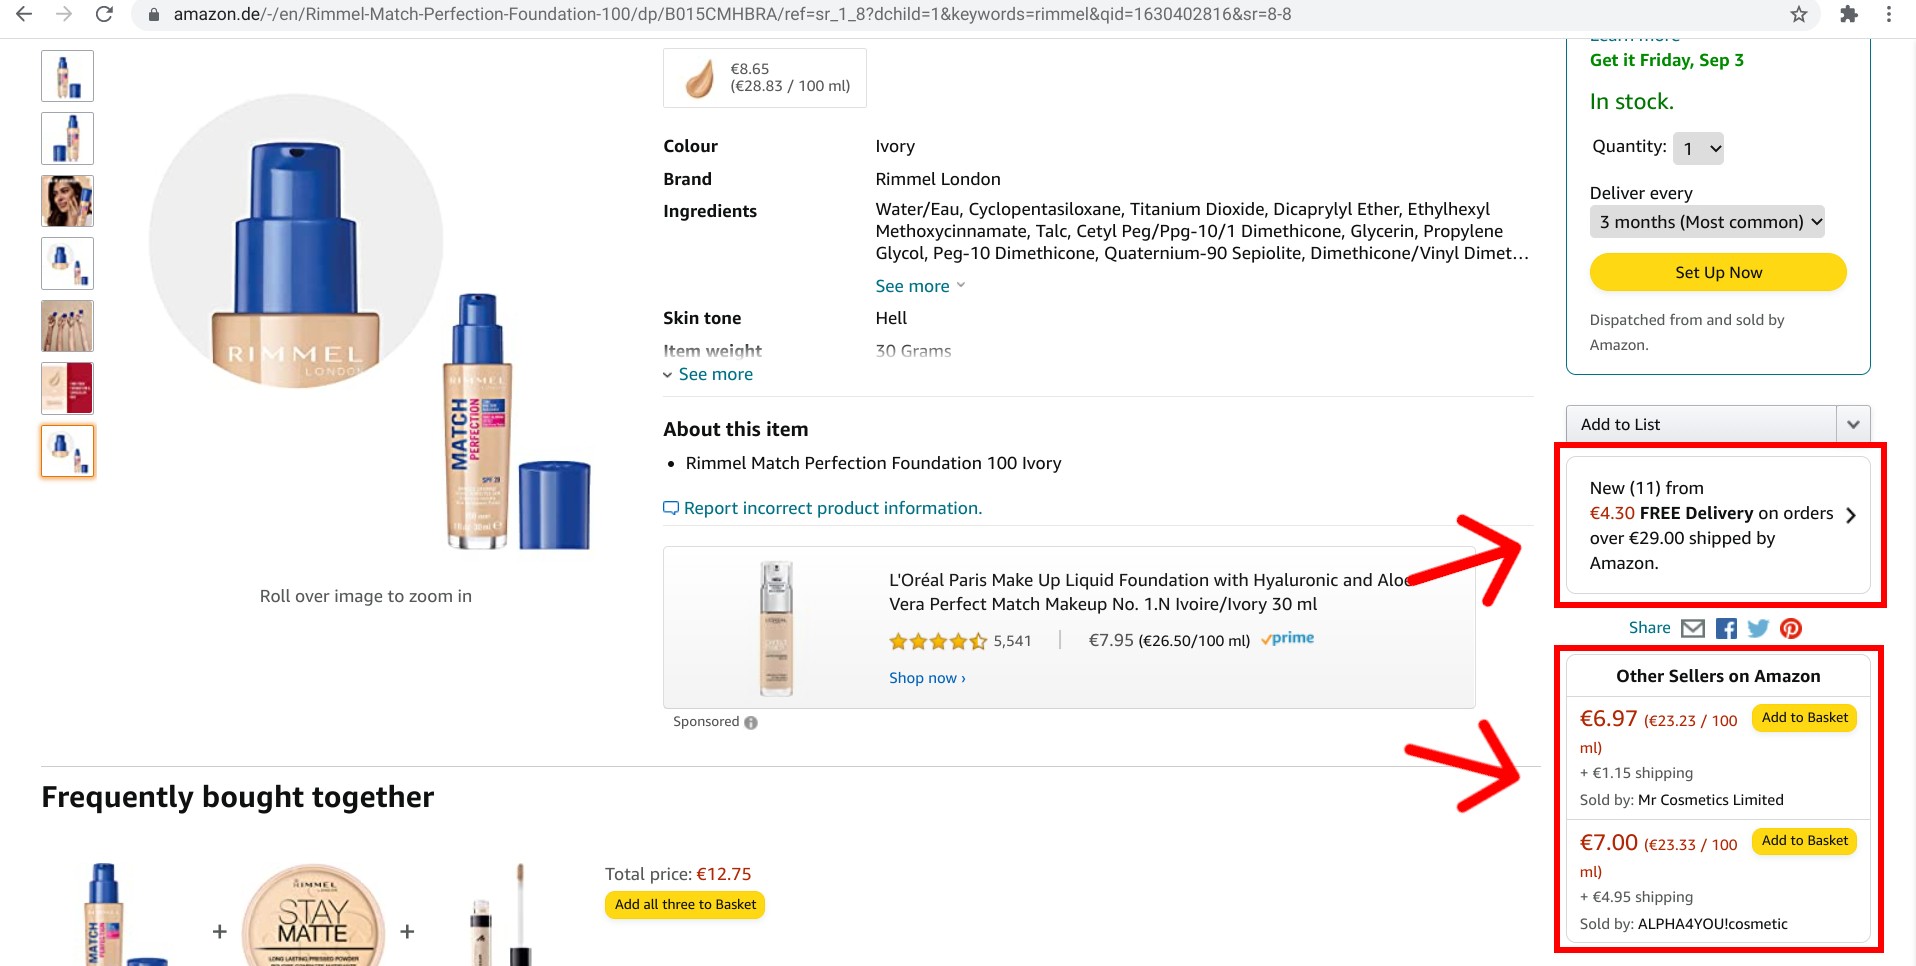 Screenshot of a product listing from Amazon.de with “new” and “other sellers” highlighted